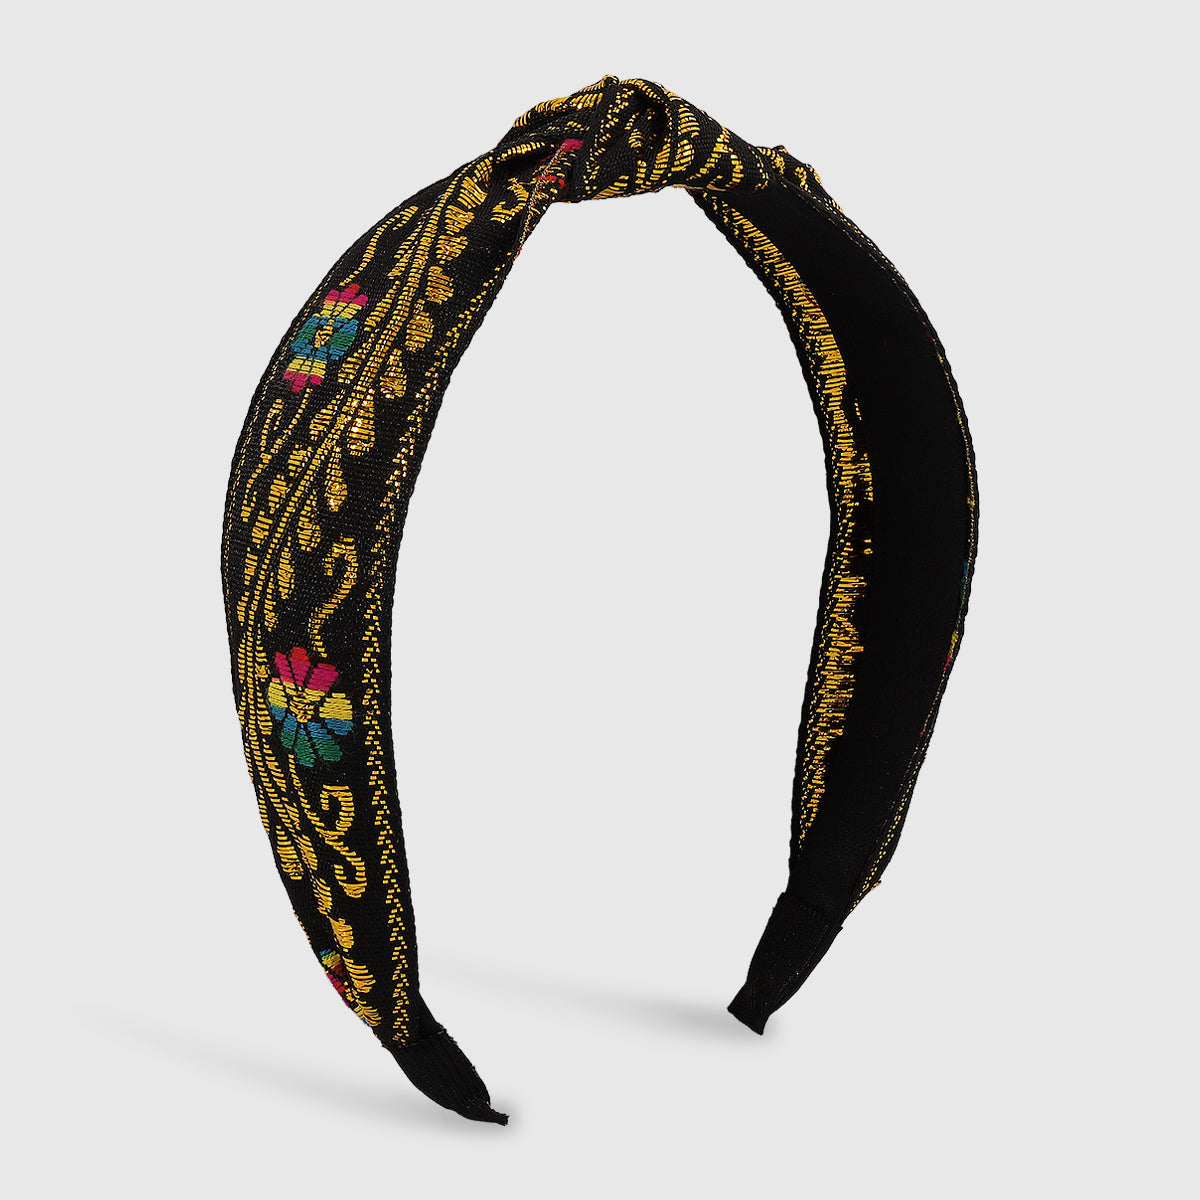 Ethnic Gold Embroidery Floral Knotted Headband medyjewelry